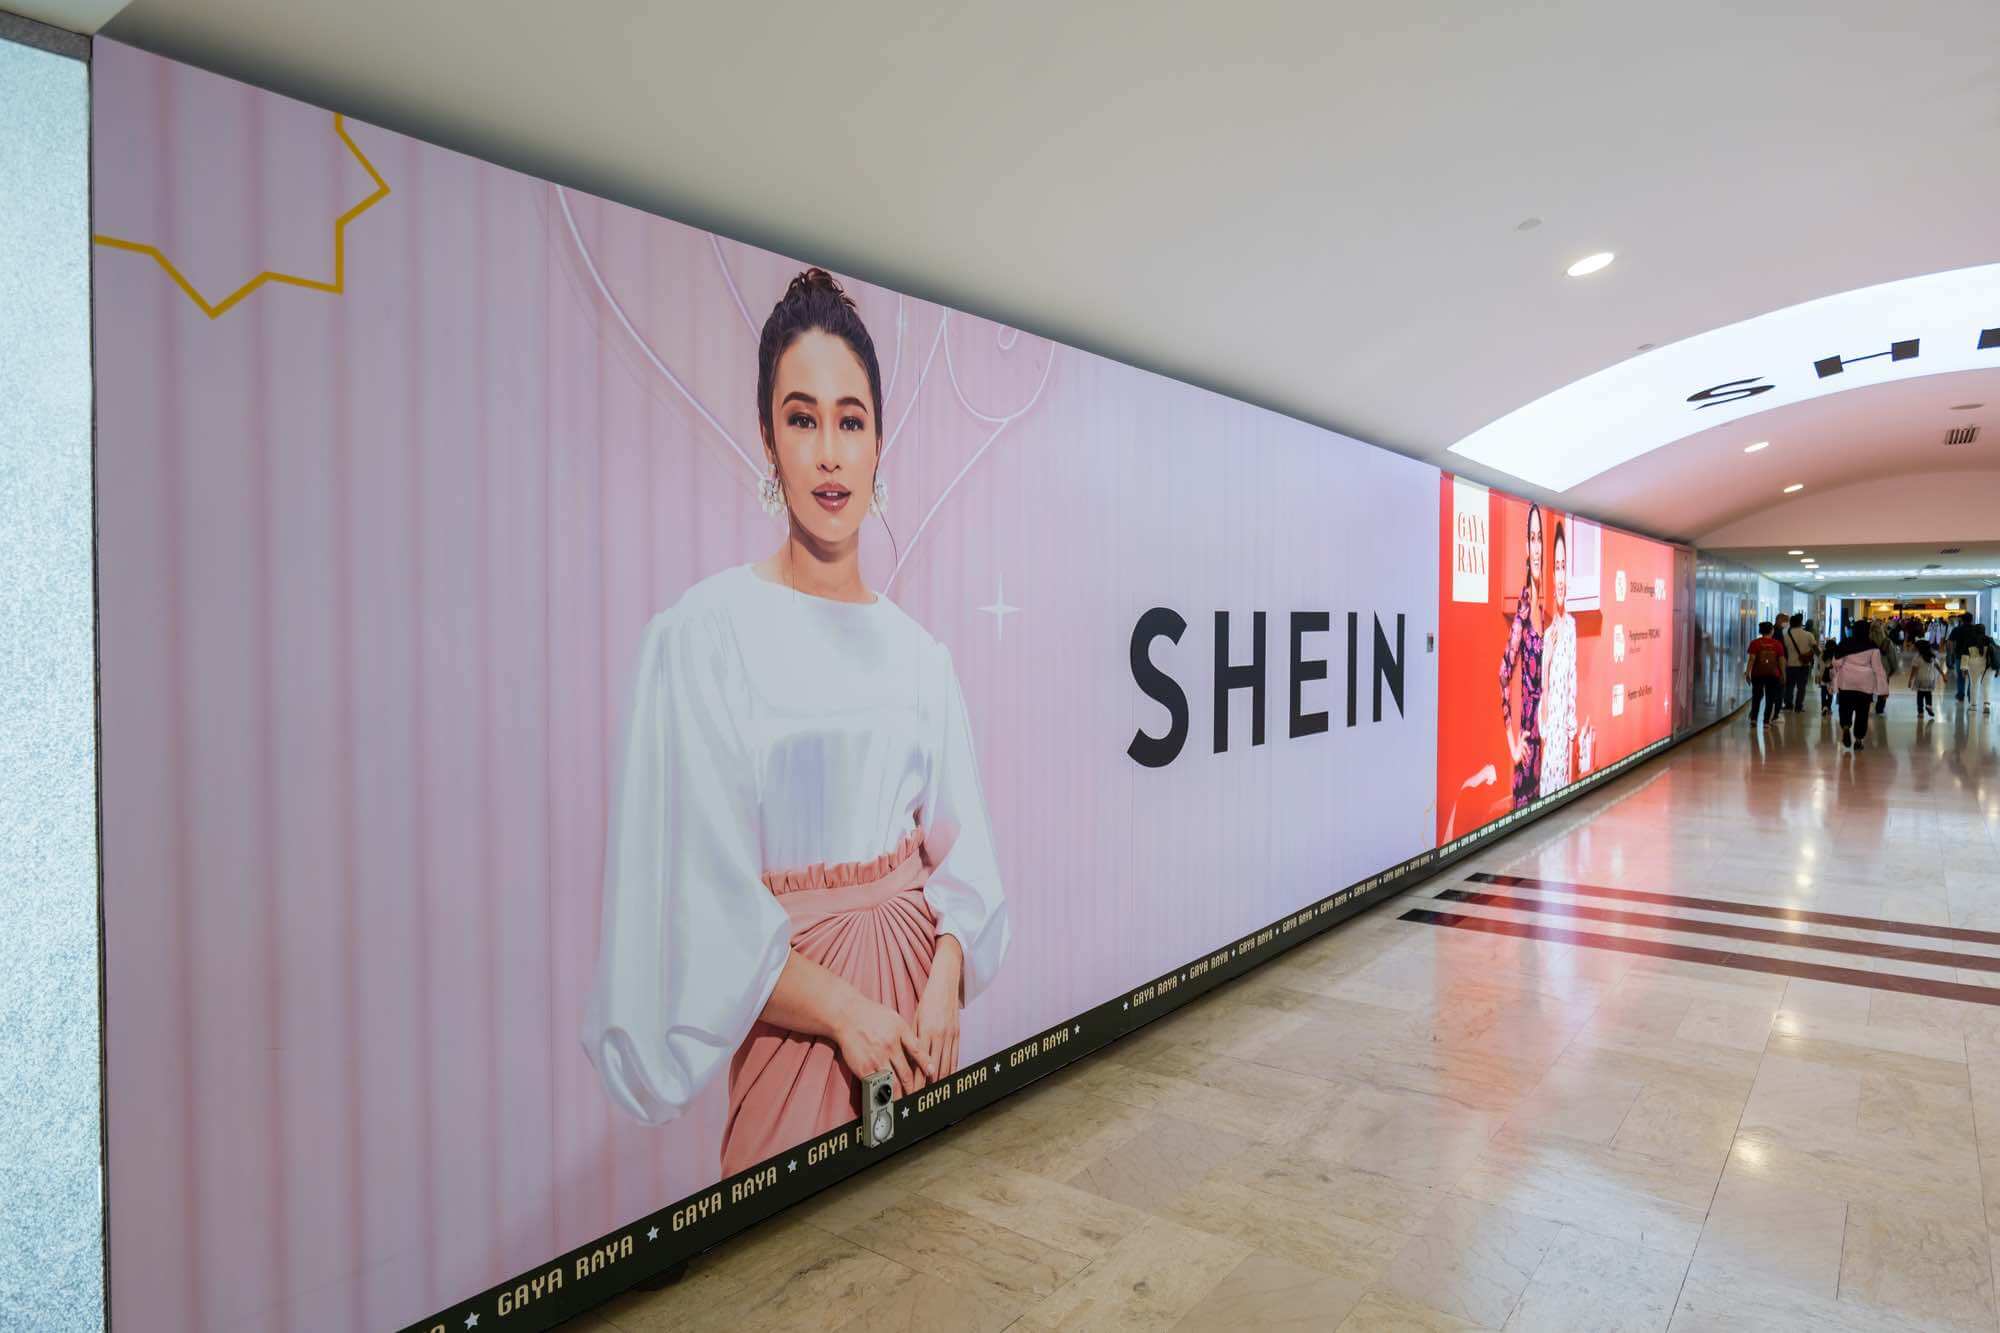 What's Shein? Is buying from Shein safe and legal?